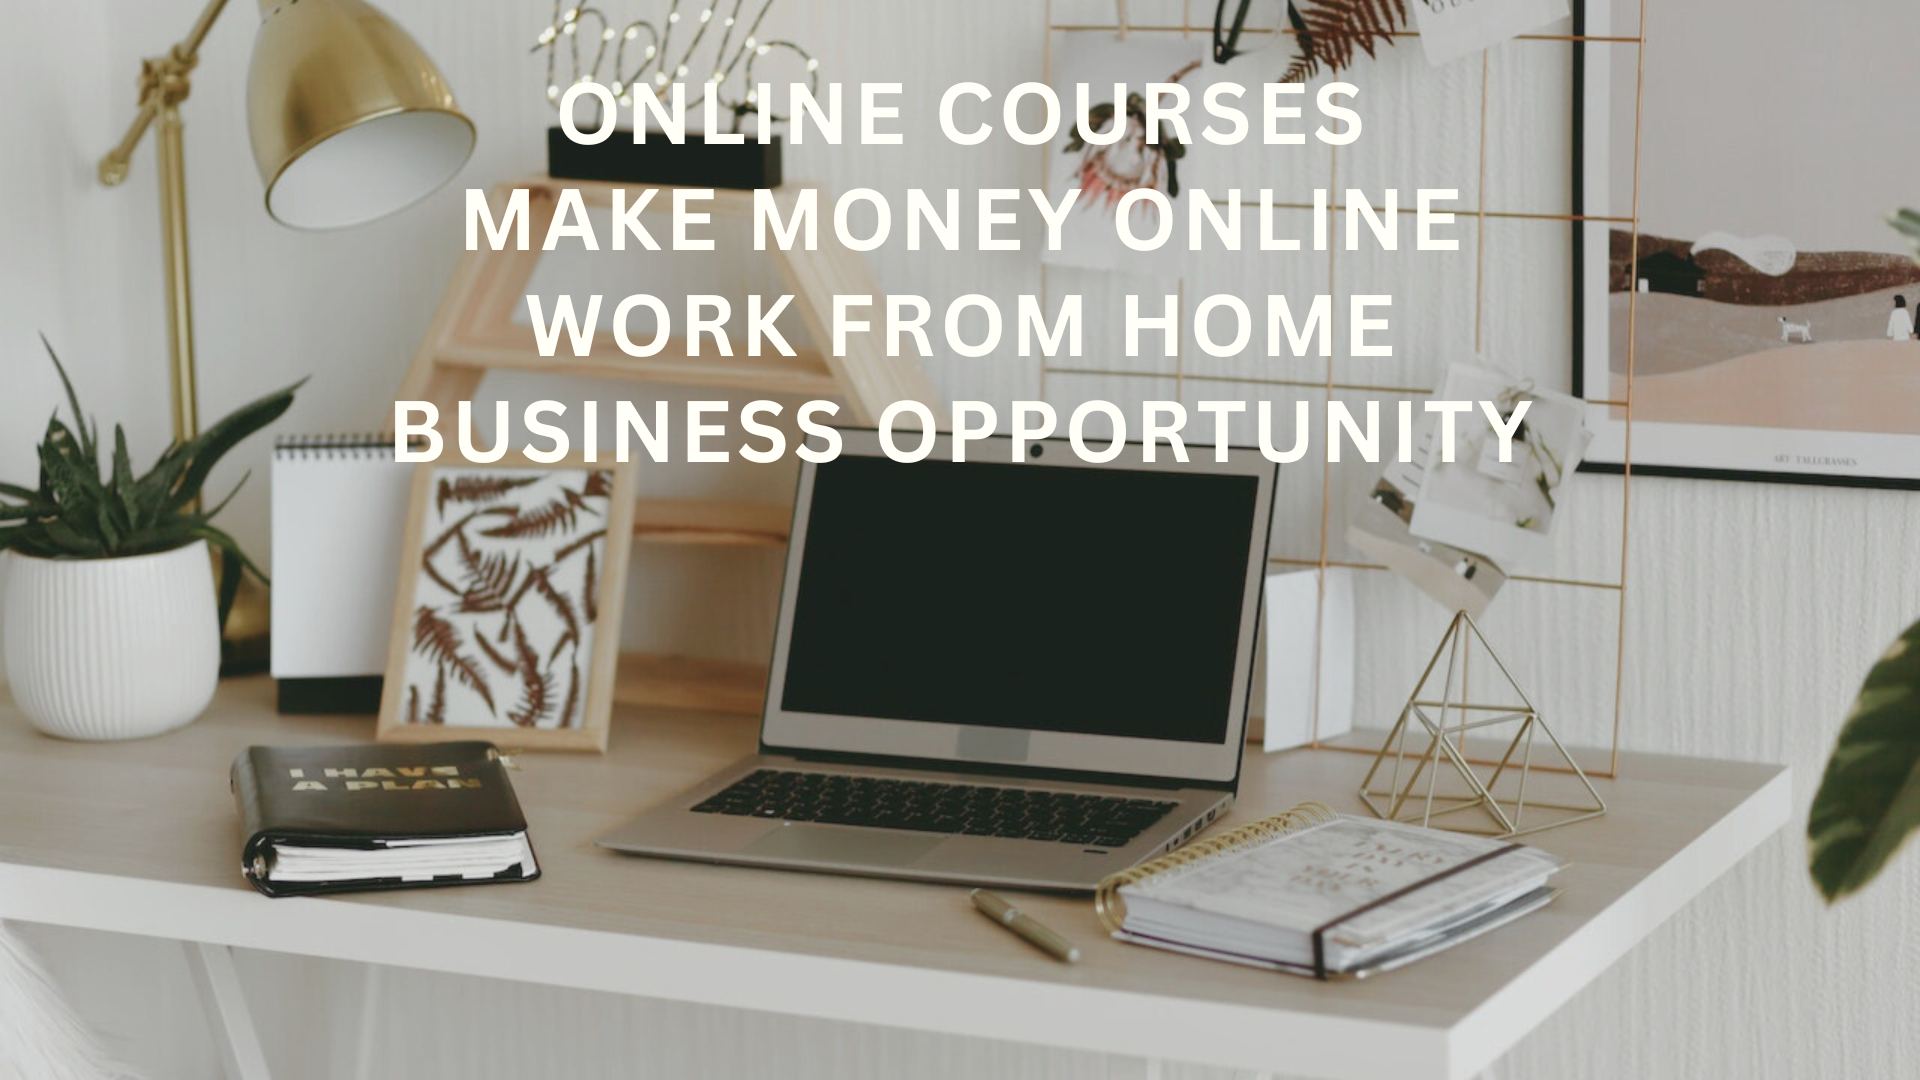 ONLINE COURSES MAKE MONEY ONLINE WORK FROM HOME BUSINESS OPPORTUNITY